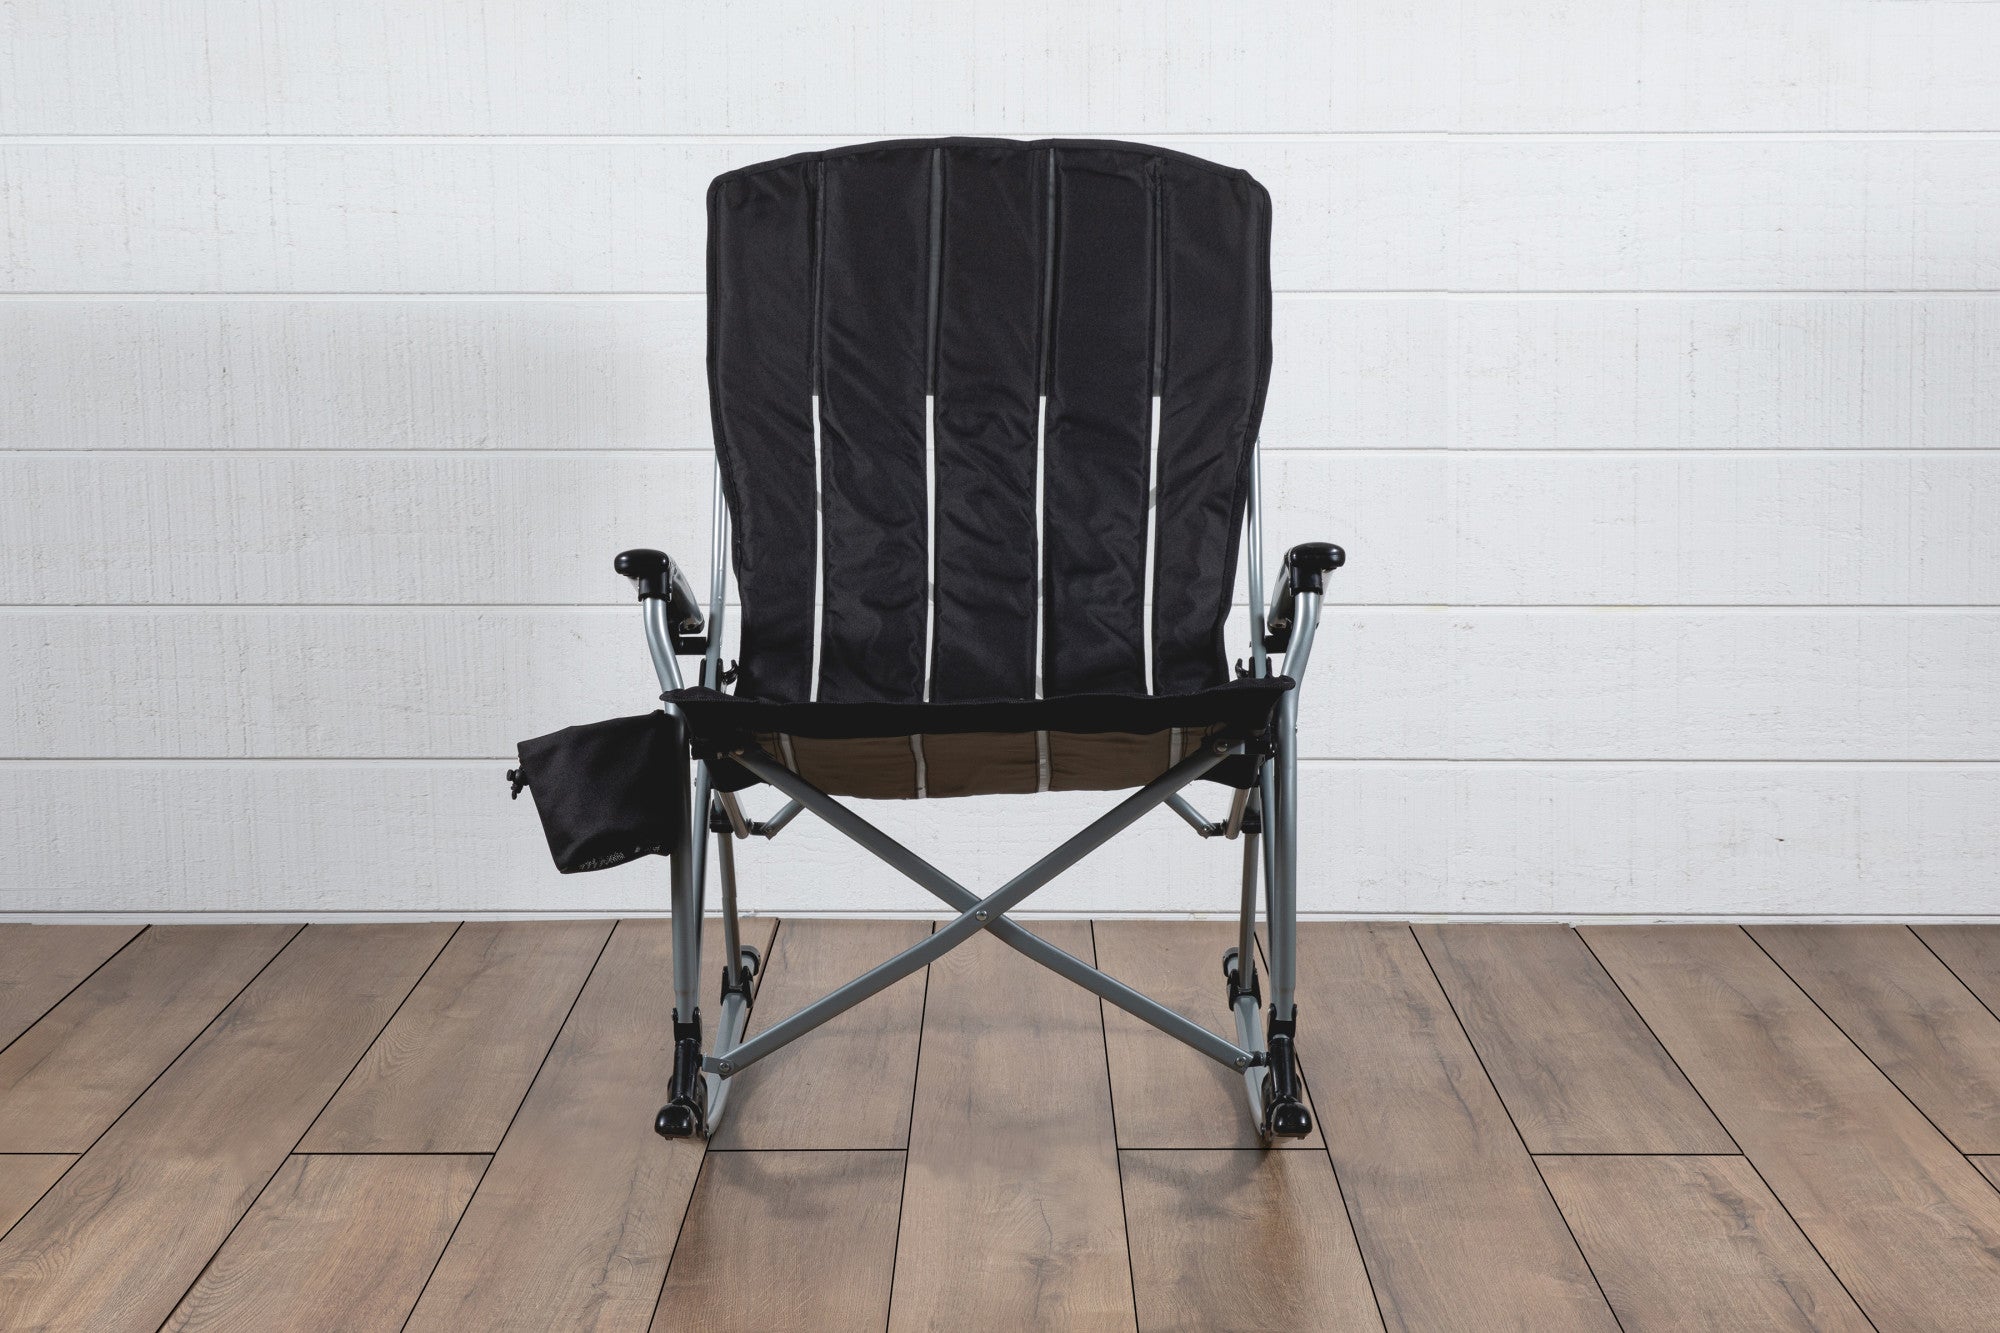 Texas Tech Red Raiders - Outdoor Rocking Camp Chair